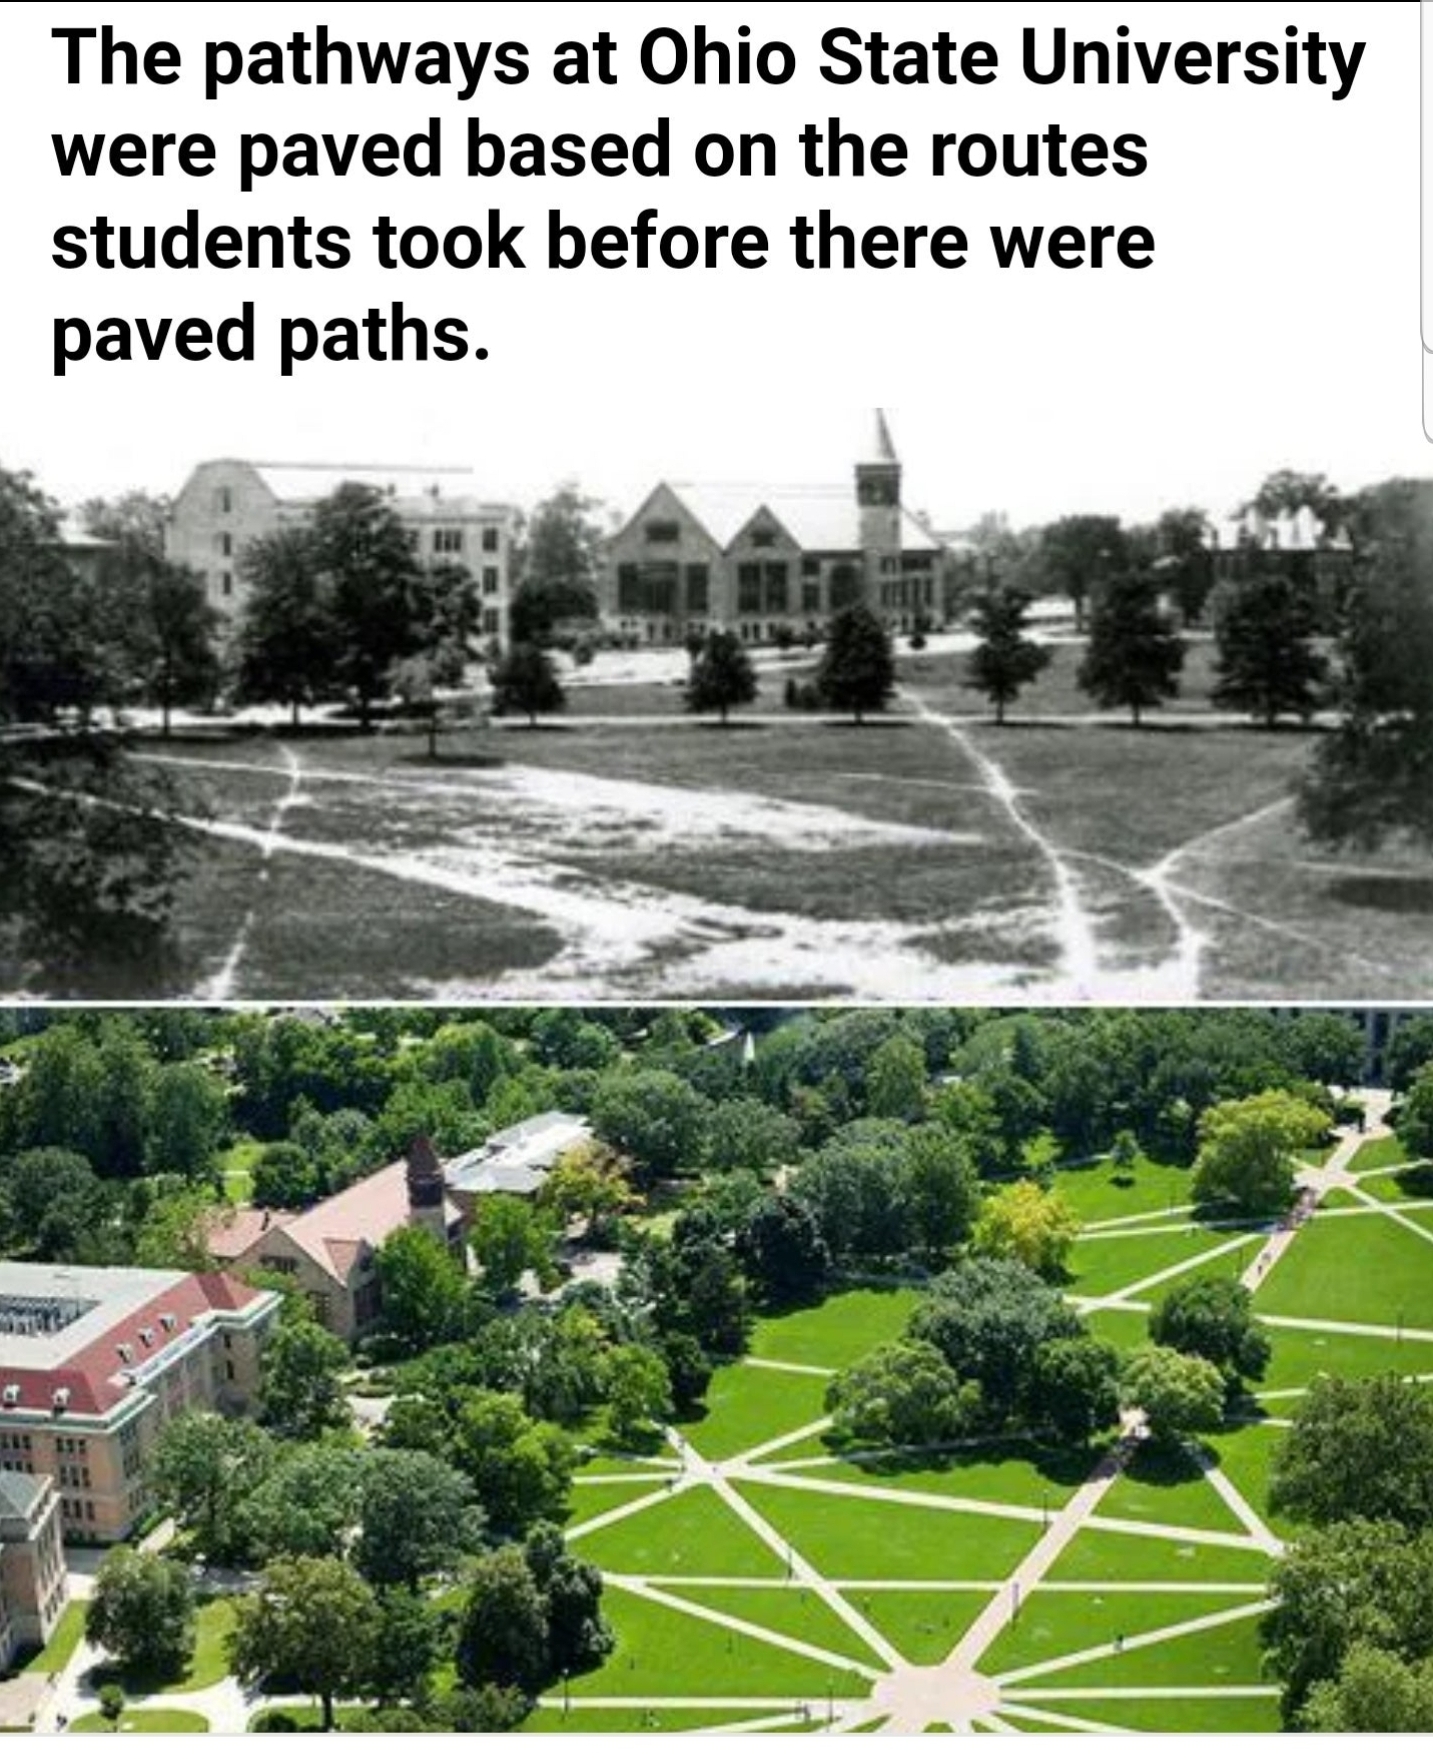 funny memes and random pics - desired paths - The pathways at Ohio State University were paved based on the routes students took before there were paved paths. 10